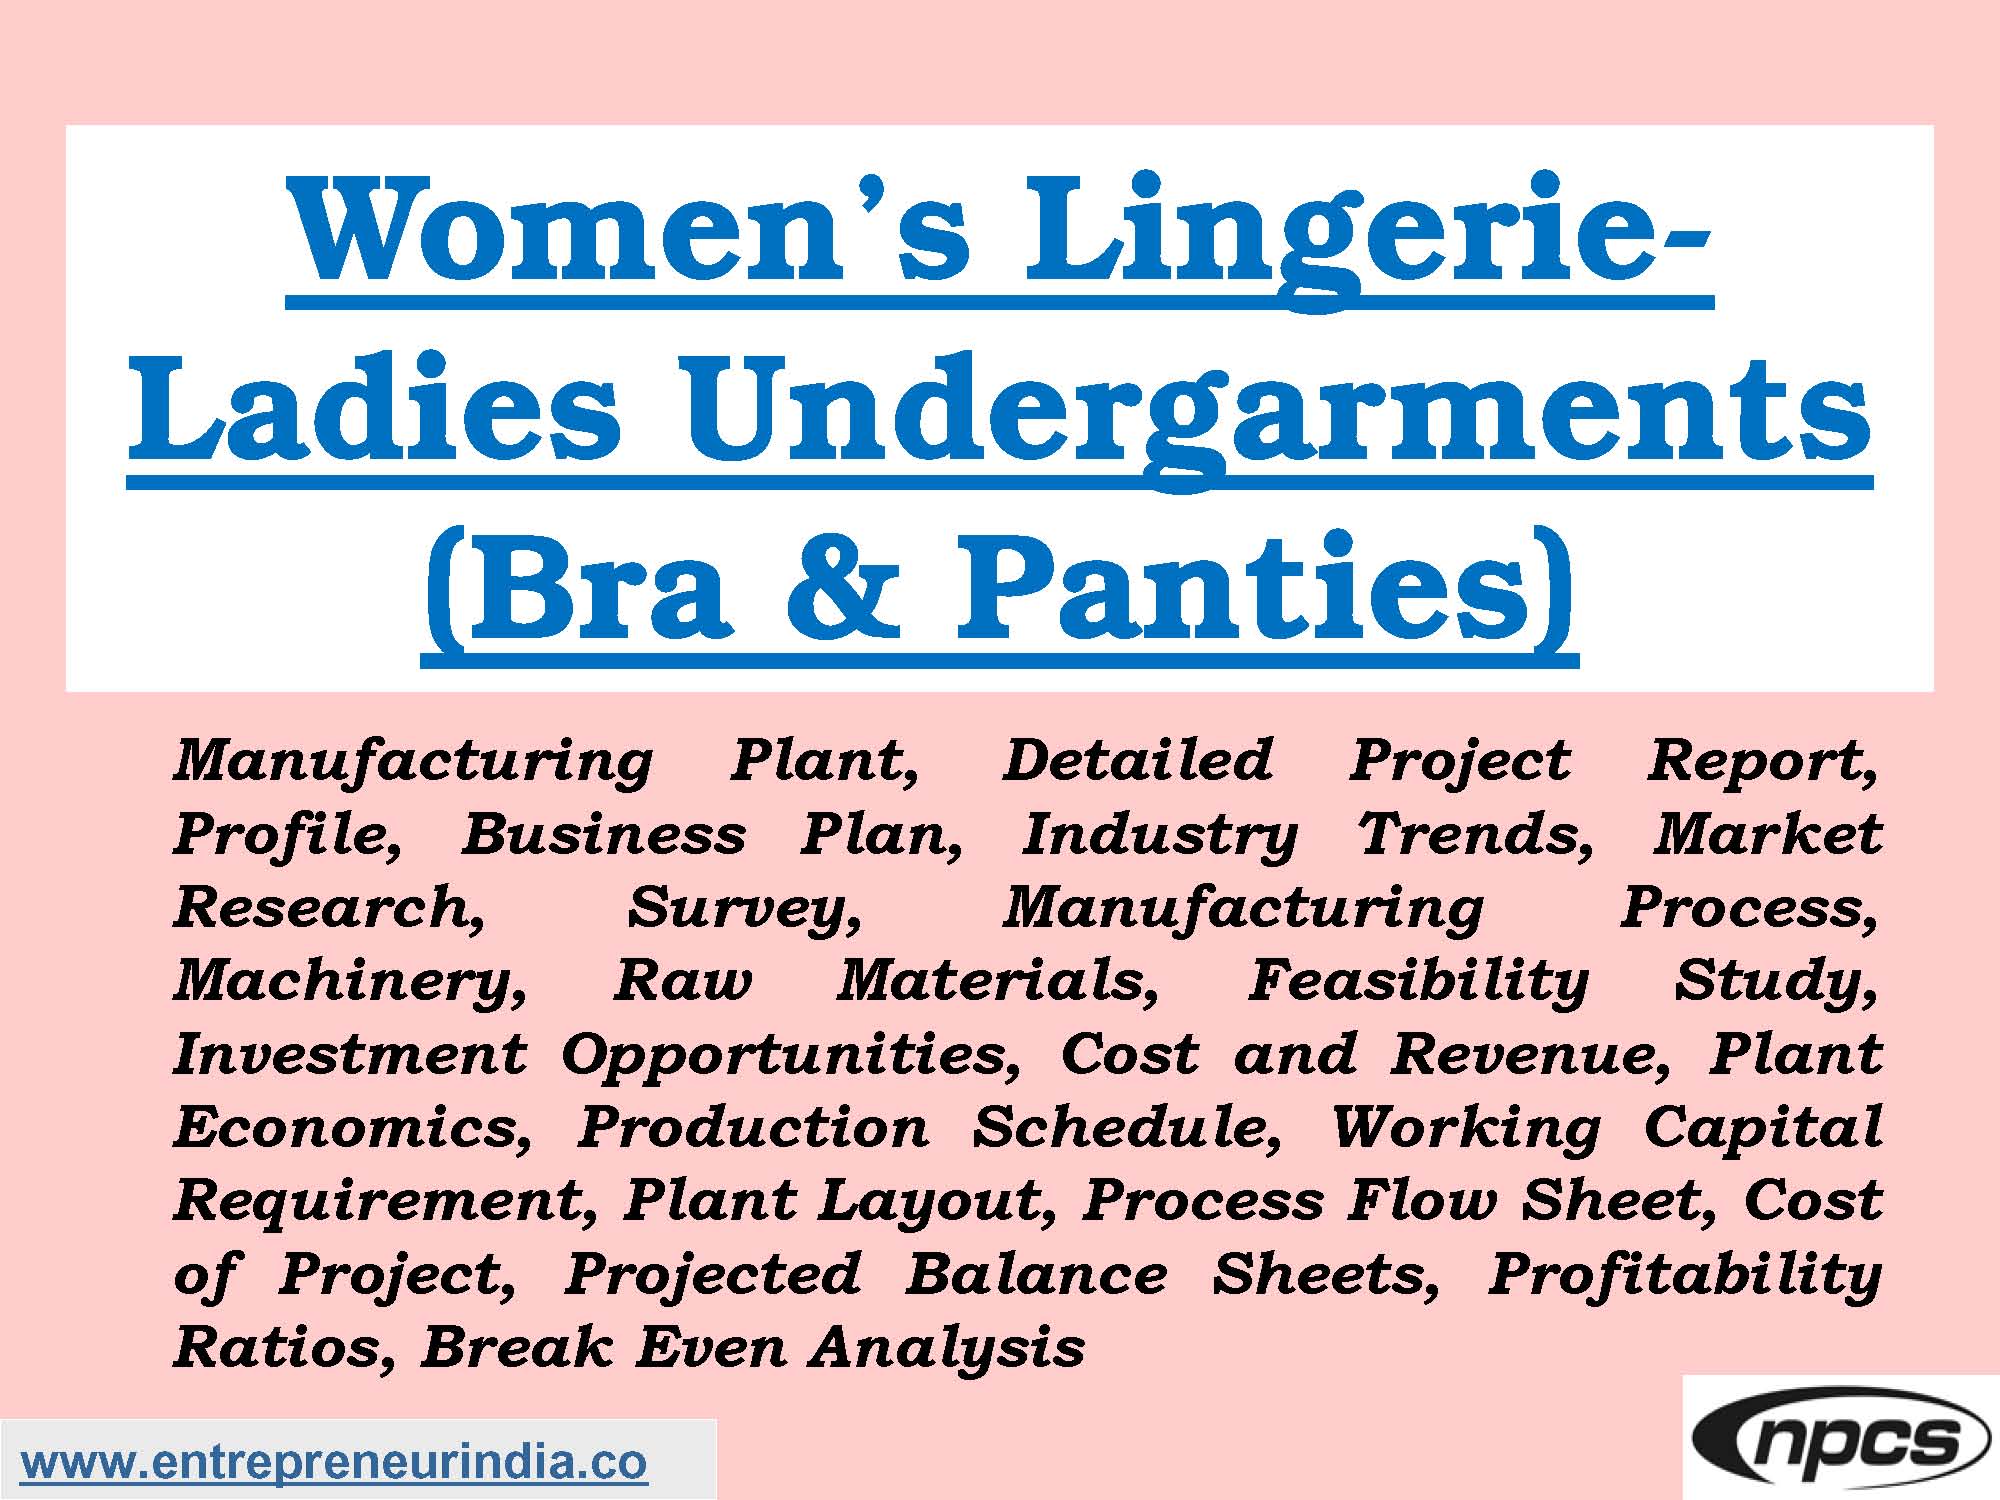 Women's Lingerie-Ladies Undergarments (Bra & Panties) Manufacturing Plant,  Detailed Project Report, Profile, Business Plan, Industry Trends, Market  Research, Survey, Manufacturing Process, Machinery, Raw Materials,  Feasibility Study, Investment